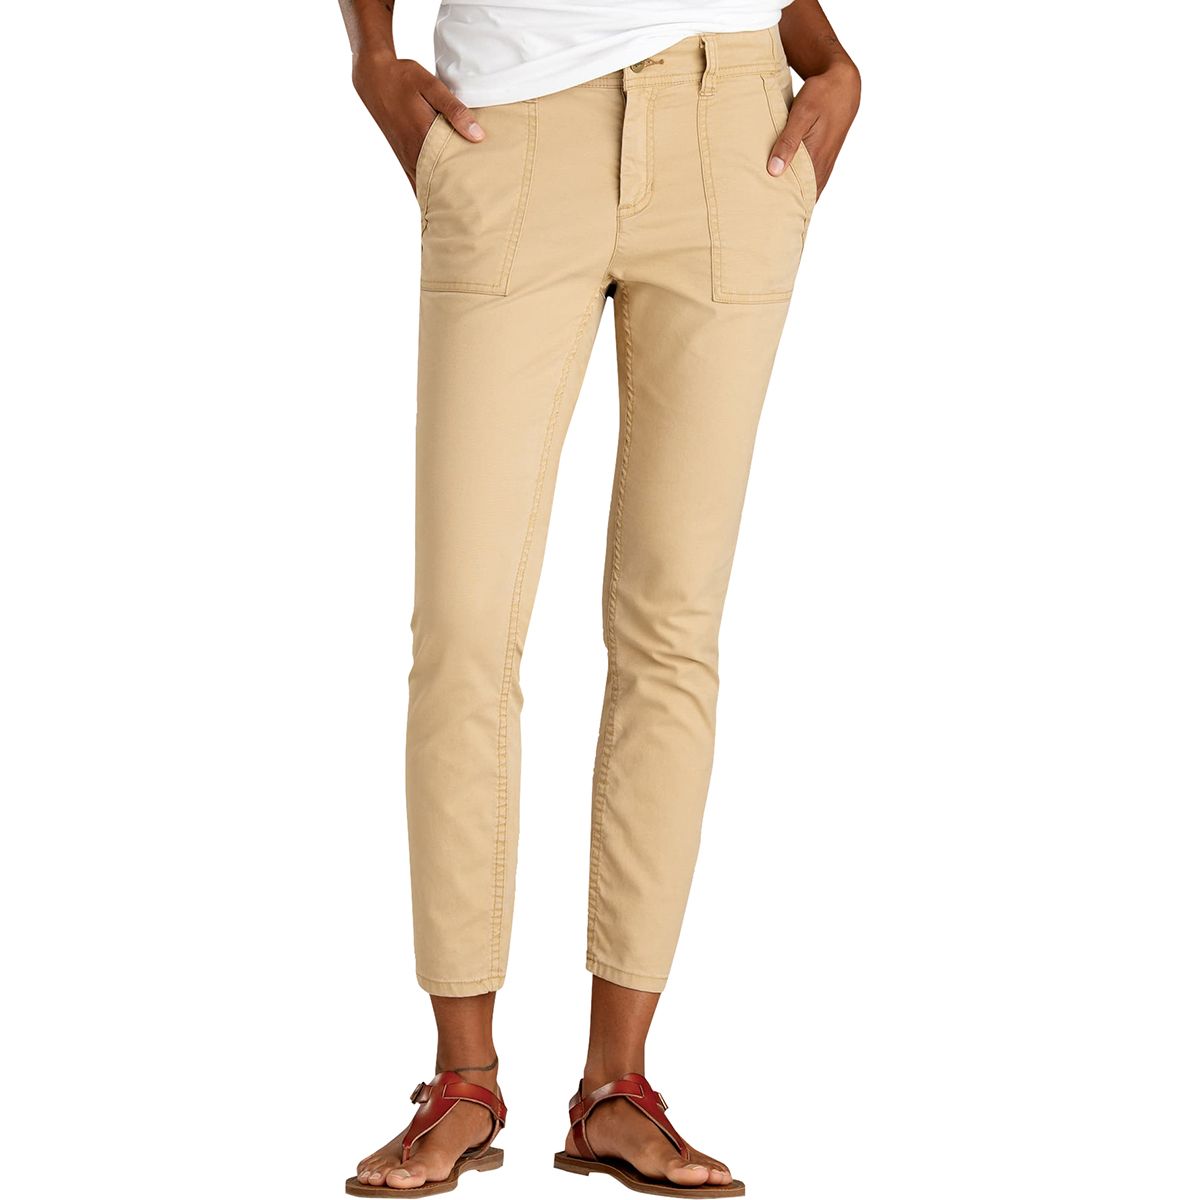 Earthworks Ankle Pant - Women